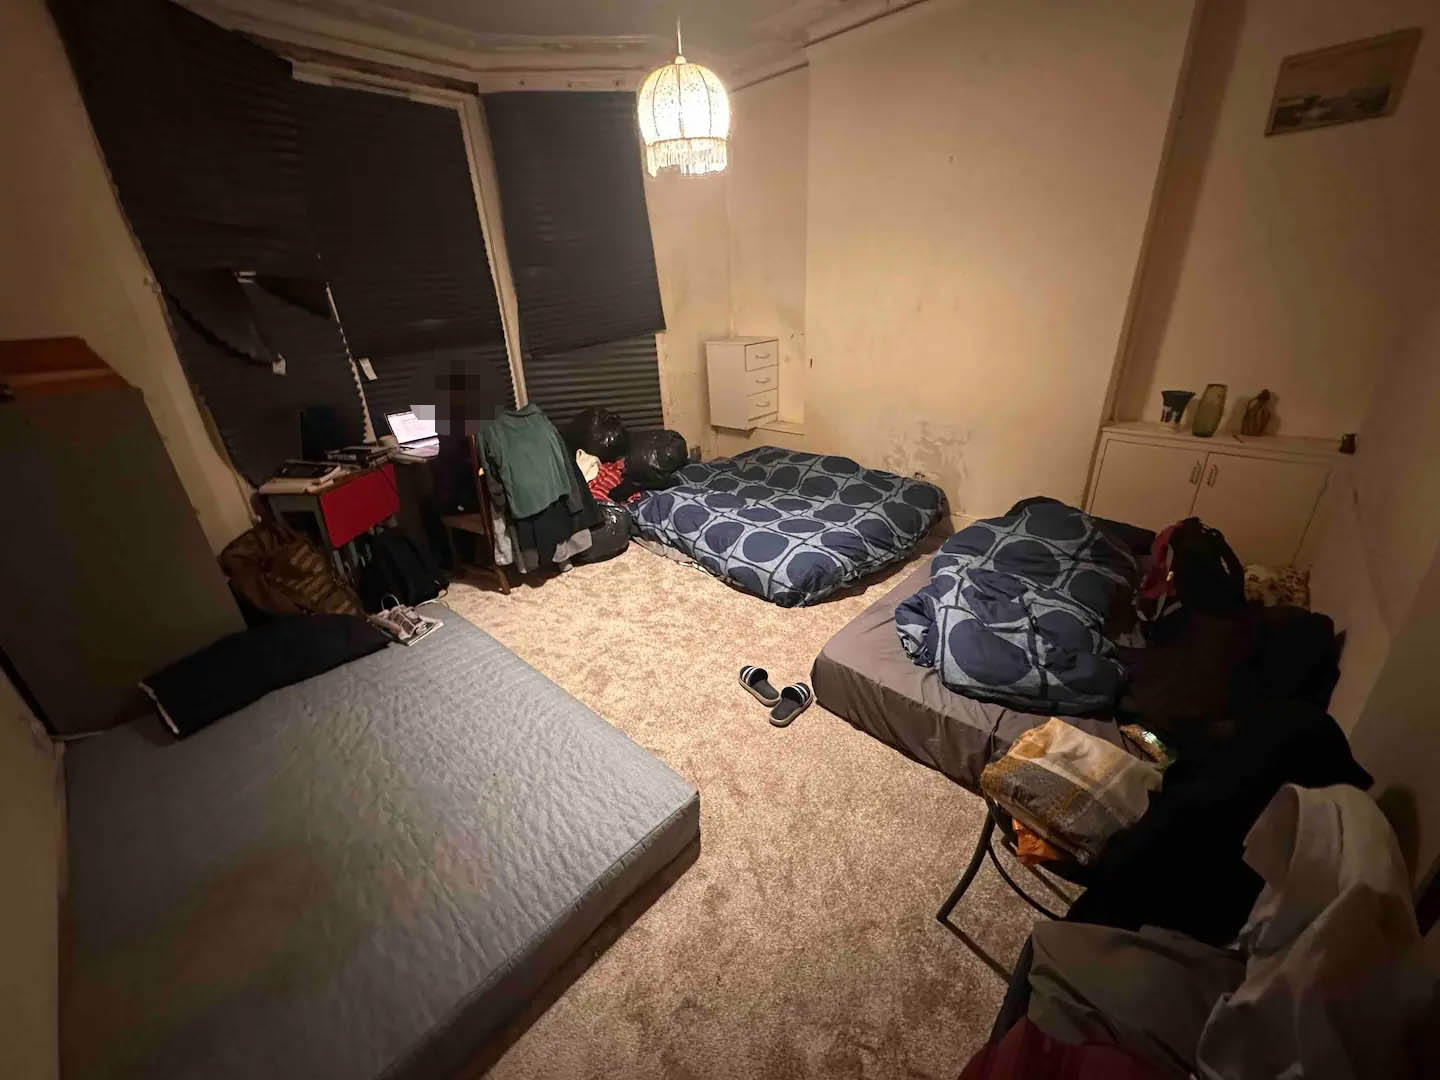 inside the bizarre listing of the London airbnb available for renting offering the chance to sleep on mattresses on the floor in a shared room.